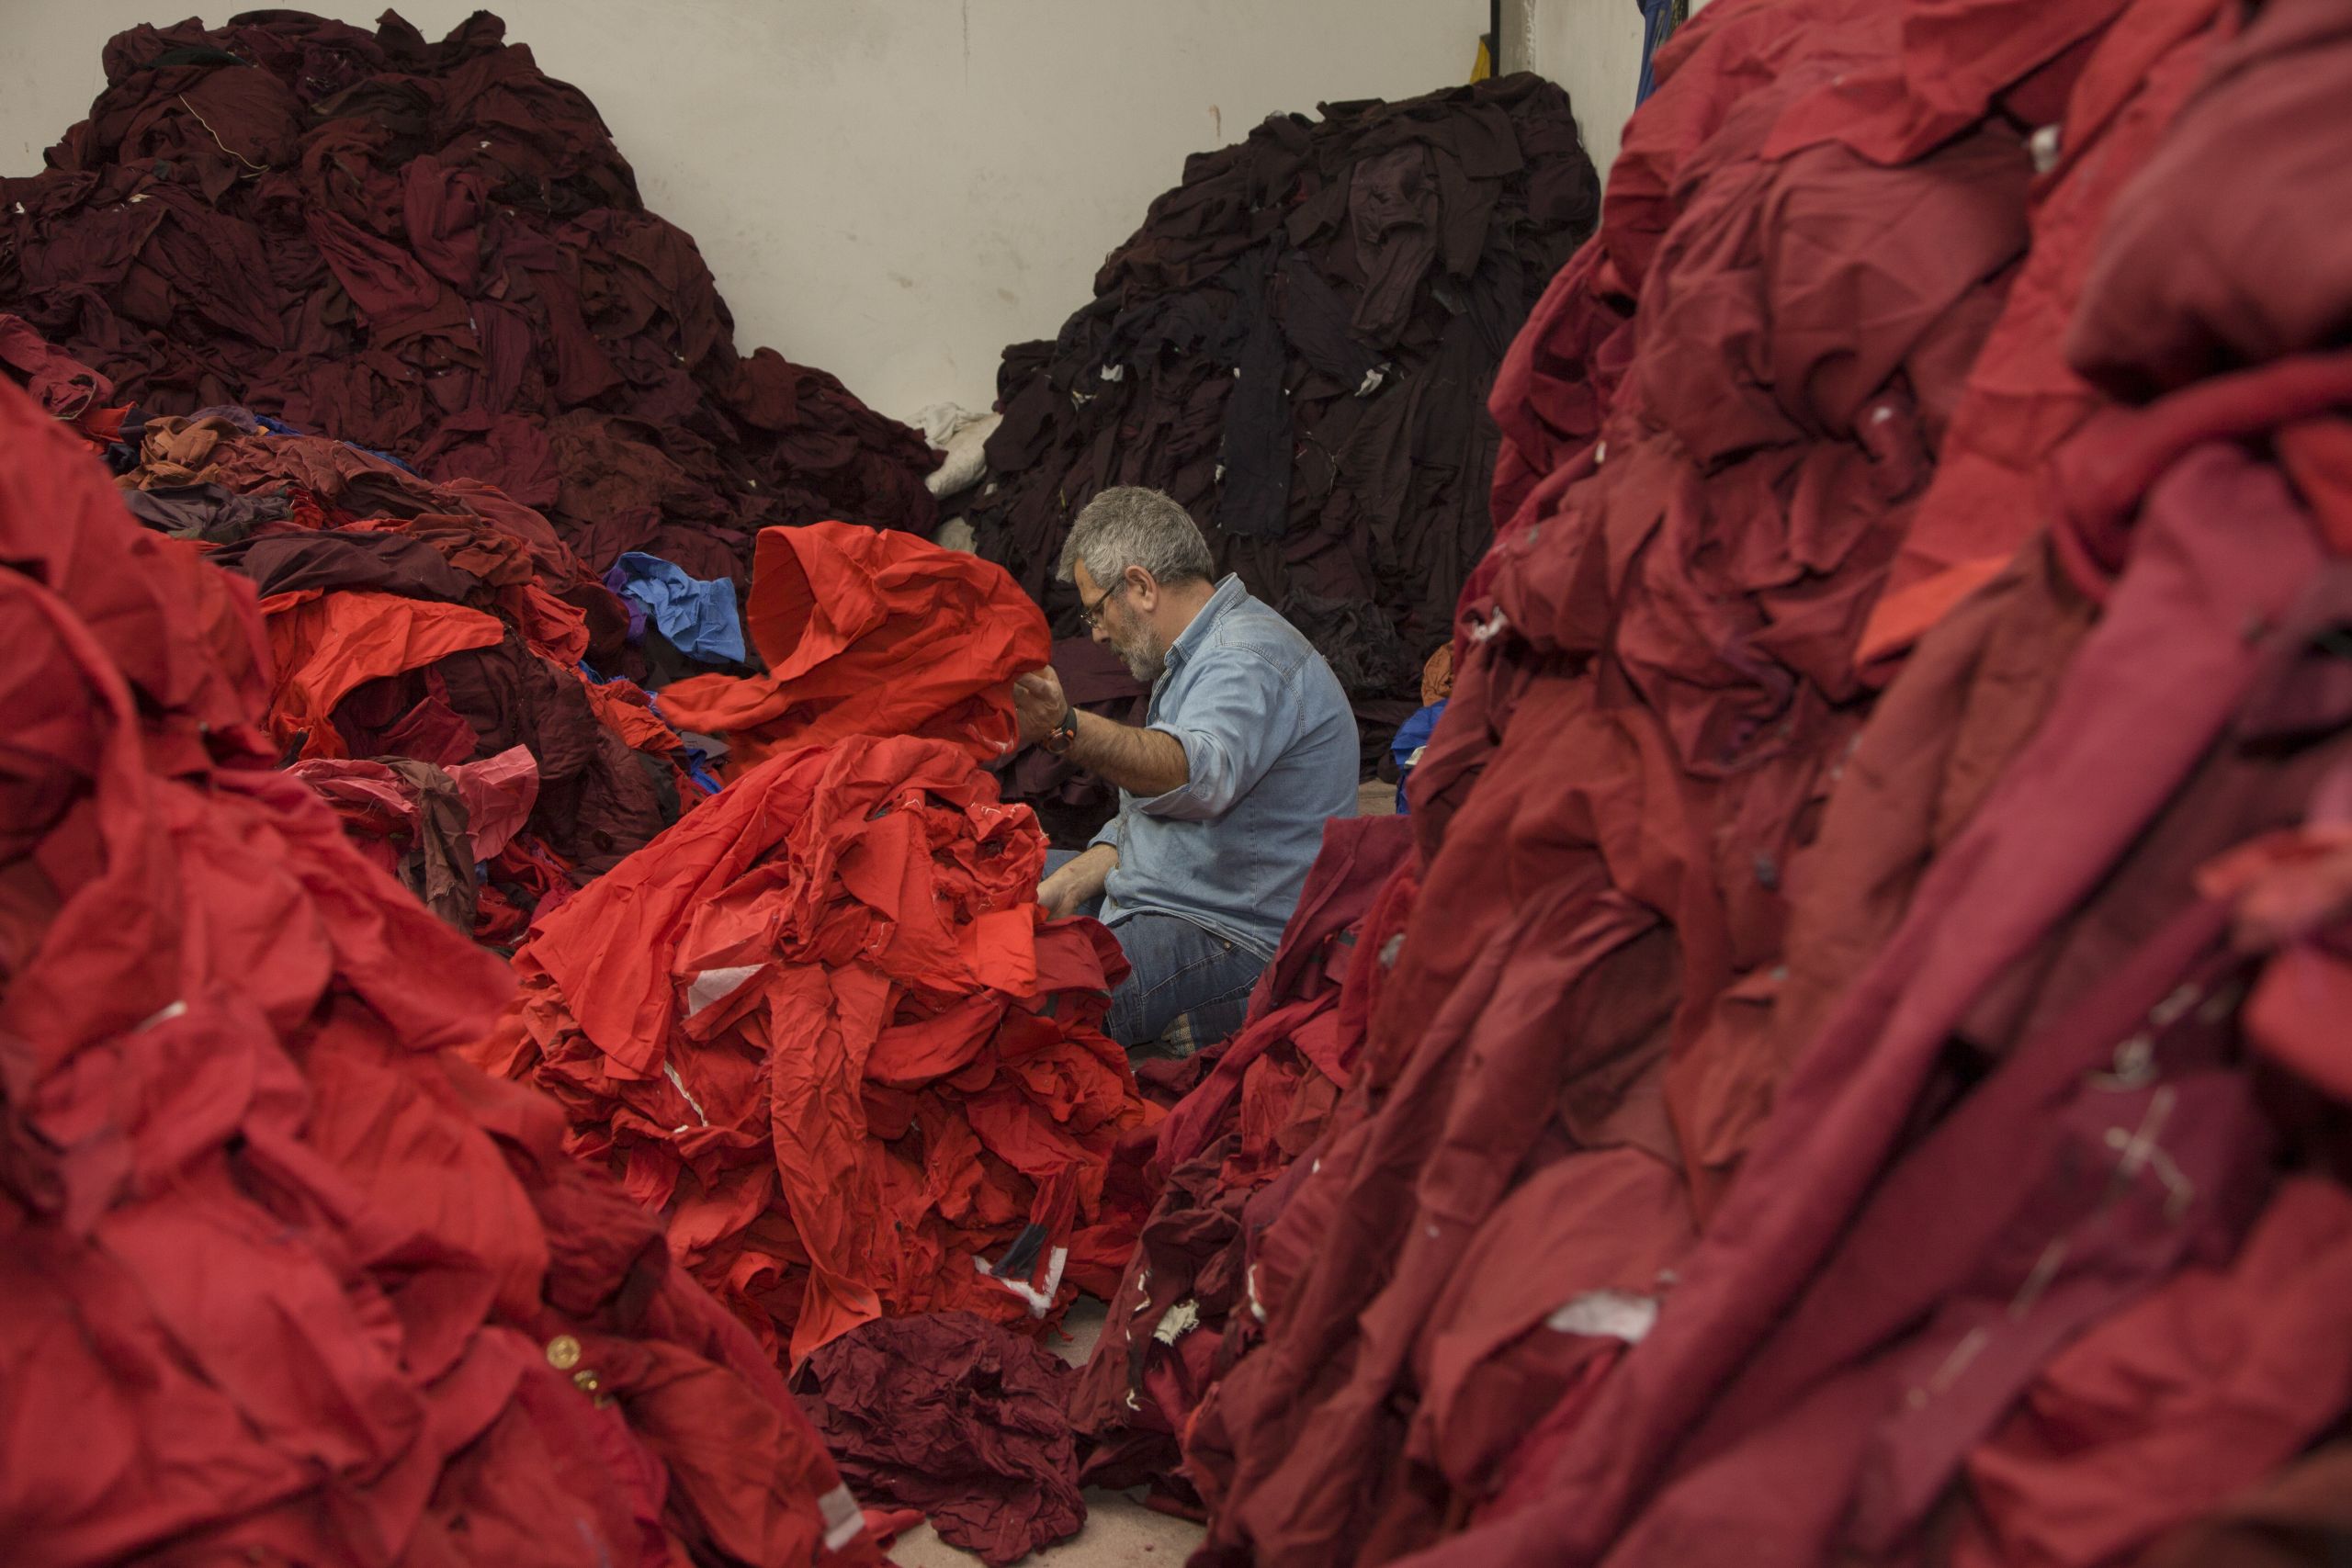 How to Sell, Donate or Recycle Your Old Clothes, and Keep Them Out of  Landfills - RecycleMore